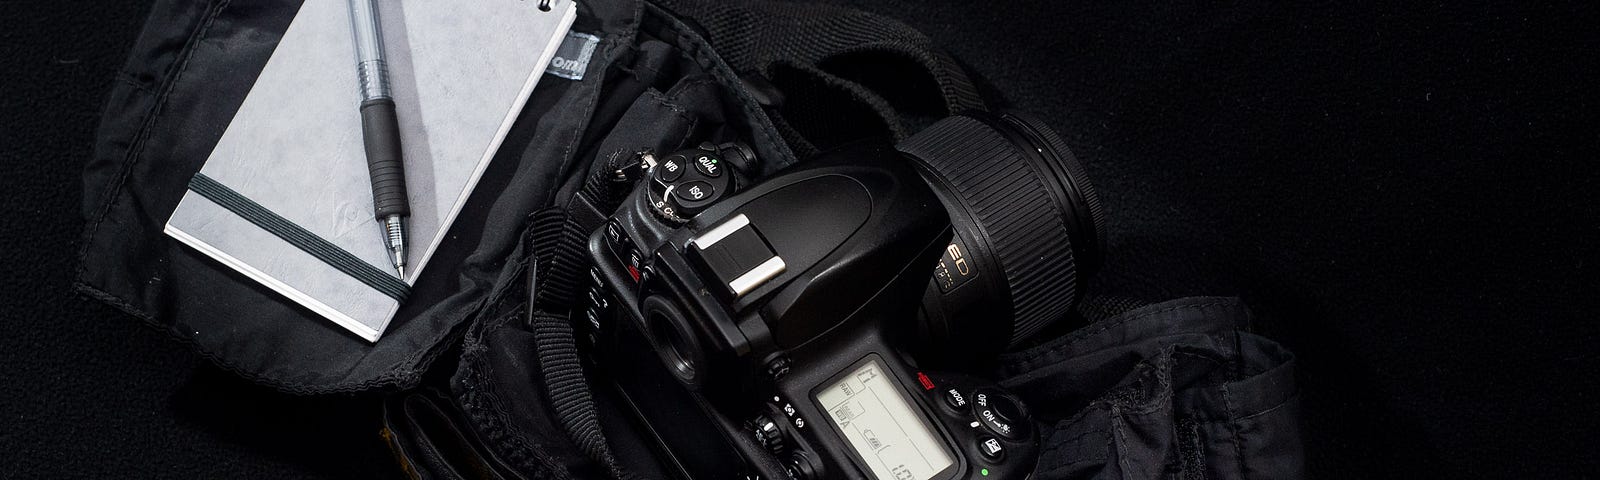 Tools of the trade: a DSLR camera and a paper notebook sitting on a camera bag.